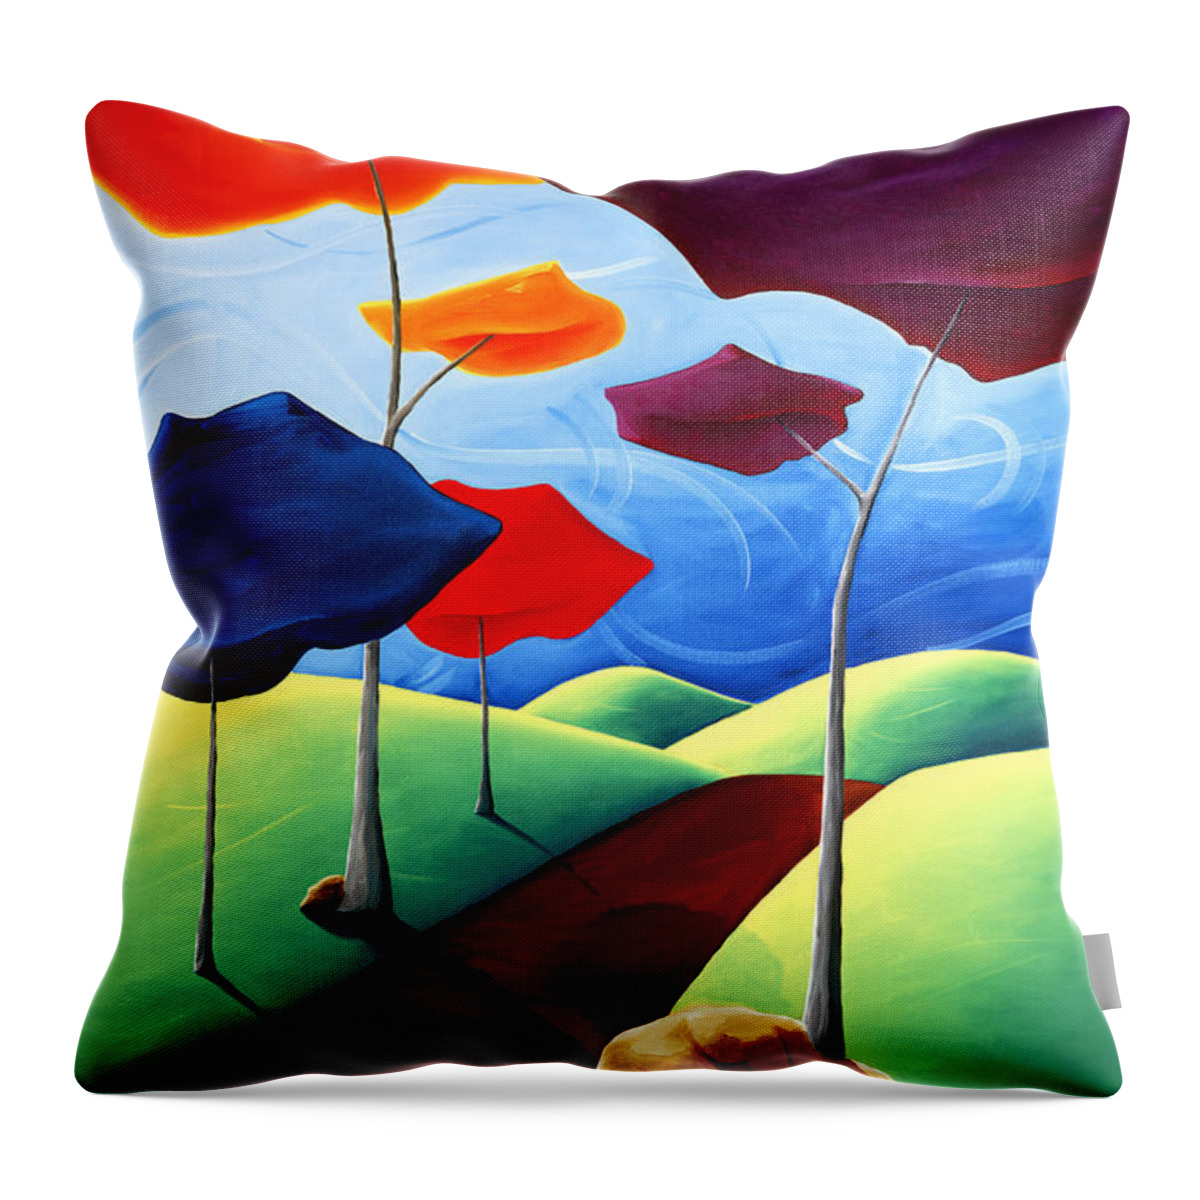 Landscape Throw Pillow featuring the painting Finding Your Way by Richard Hoedl